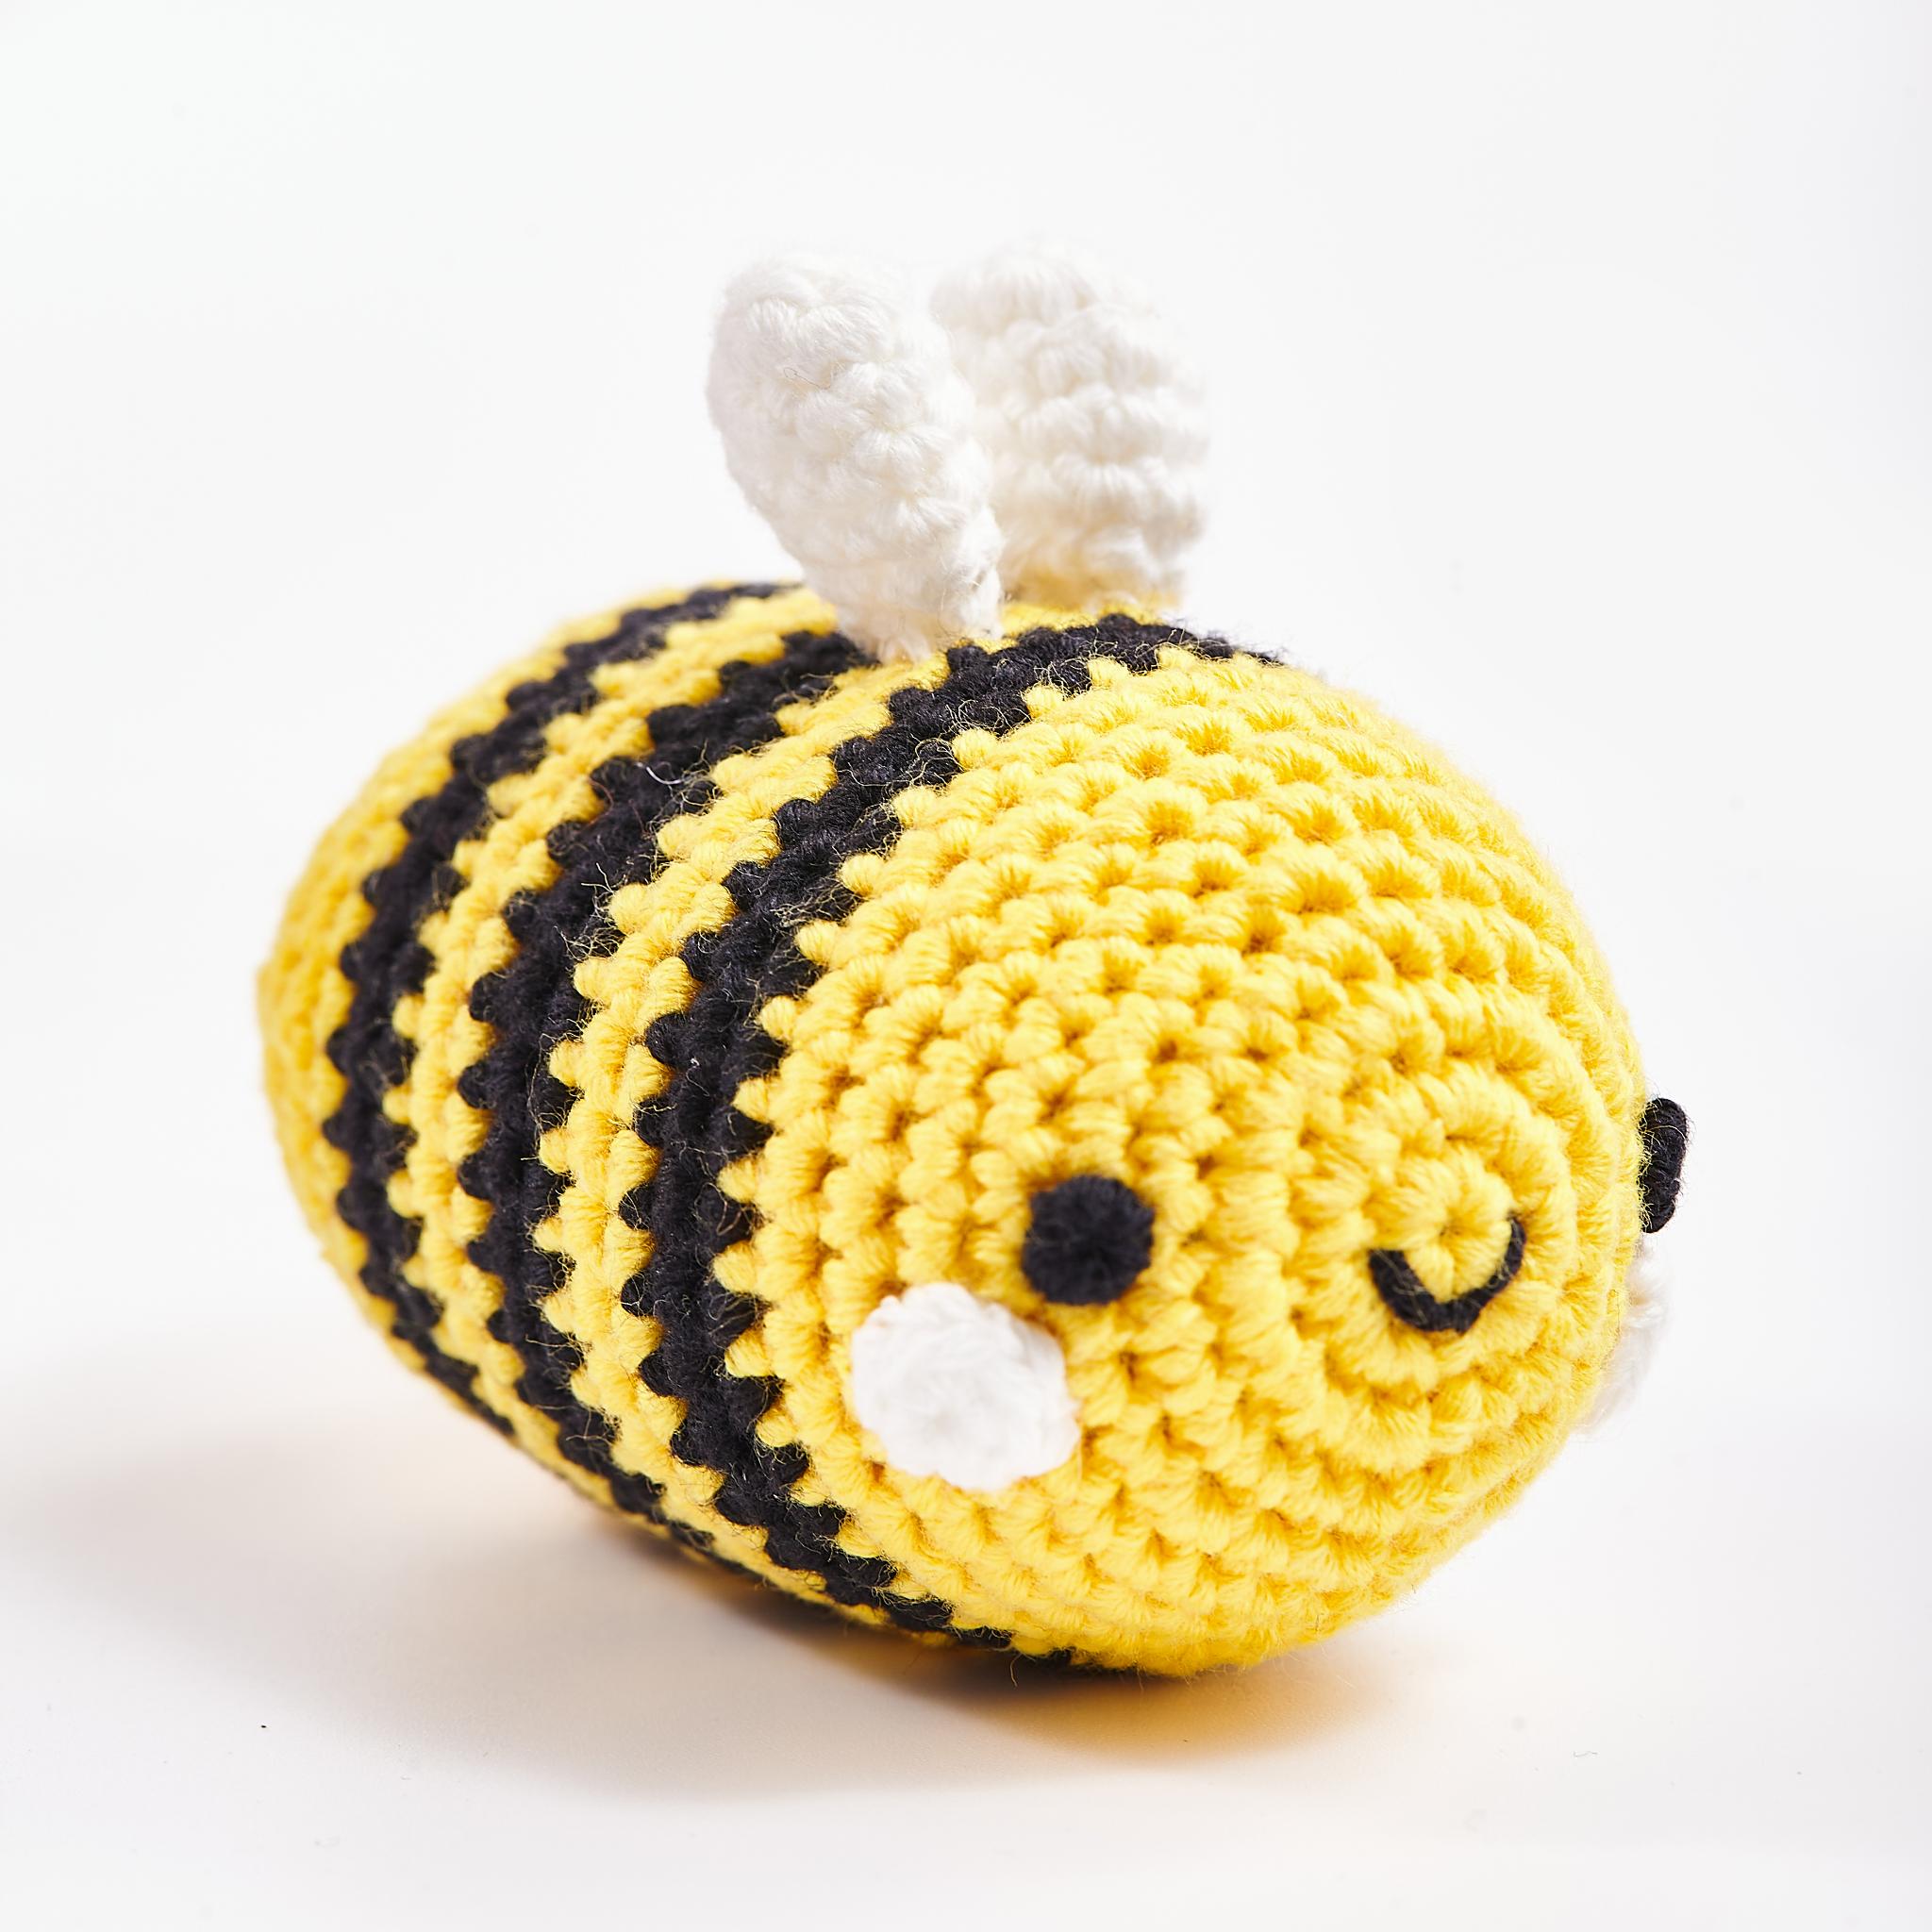 Crochet bees and beehive from organic cotton